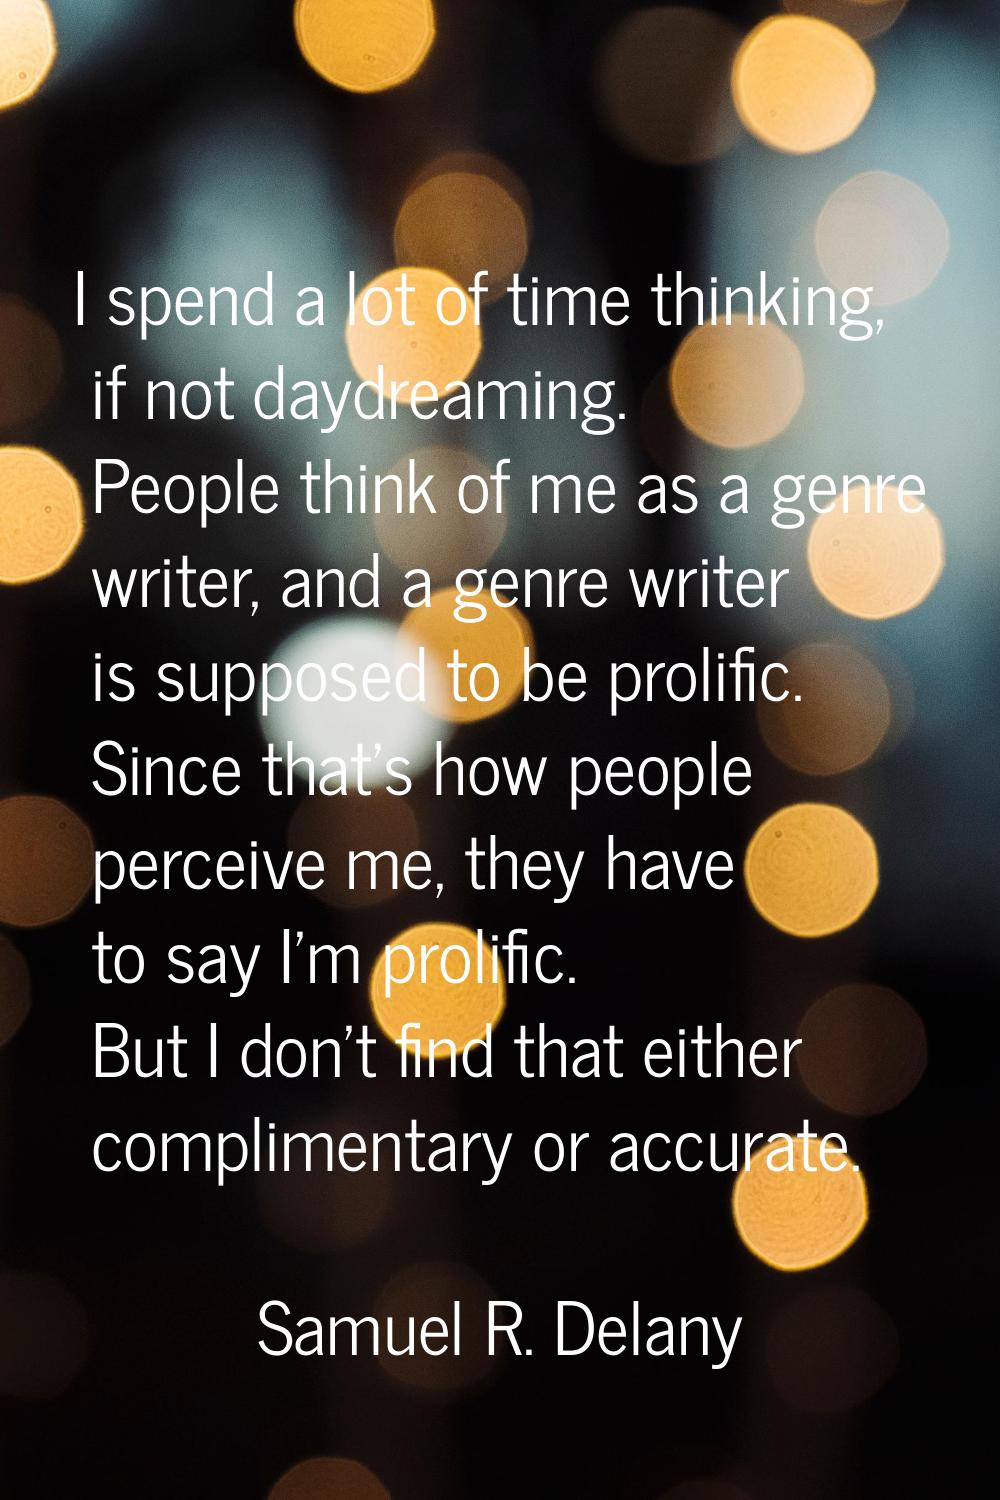 I spend a lot of time thinking, if not daydreaming. People think of me as a genre writer, and a gen